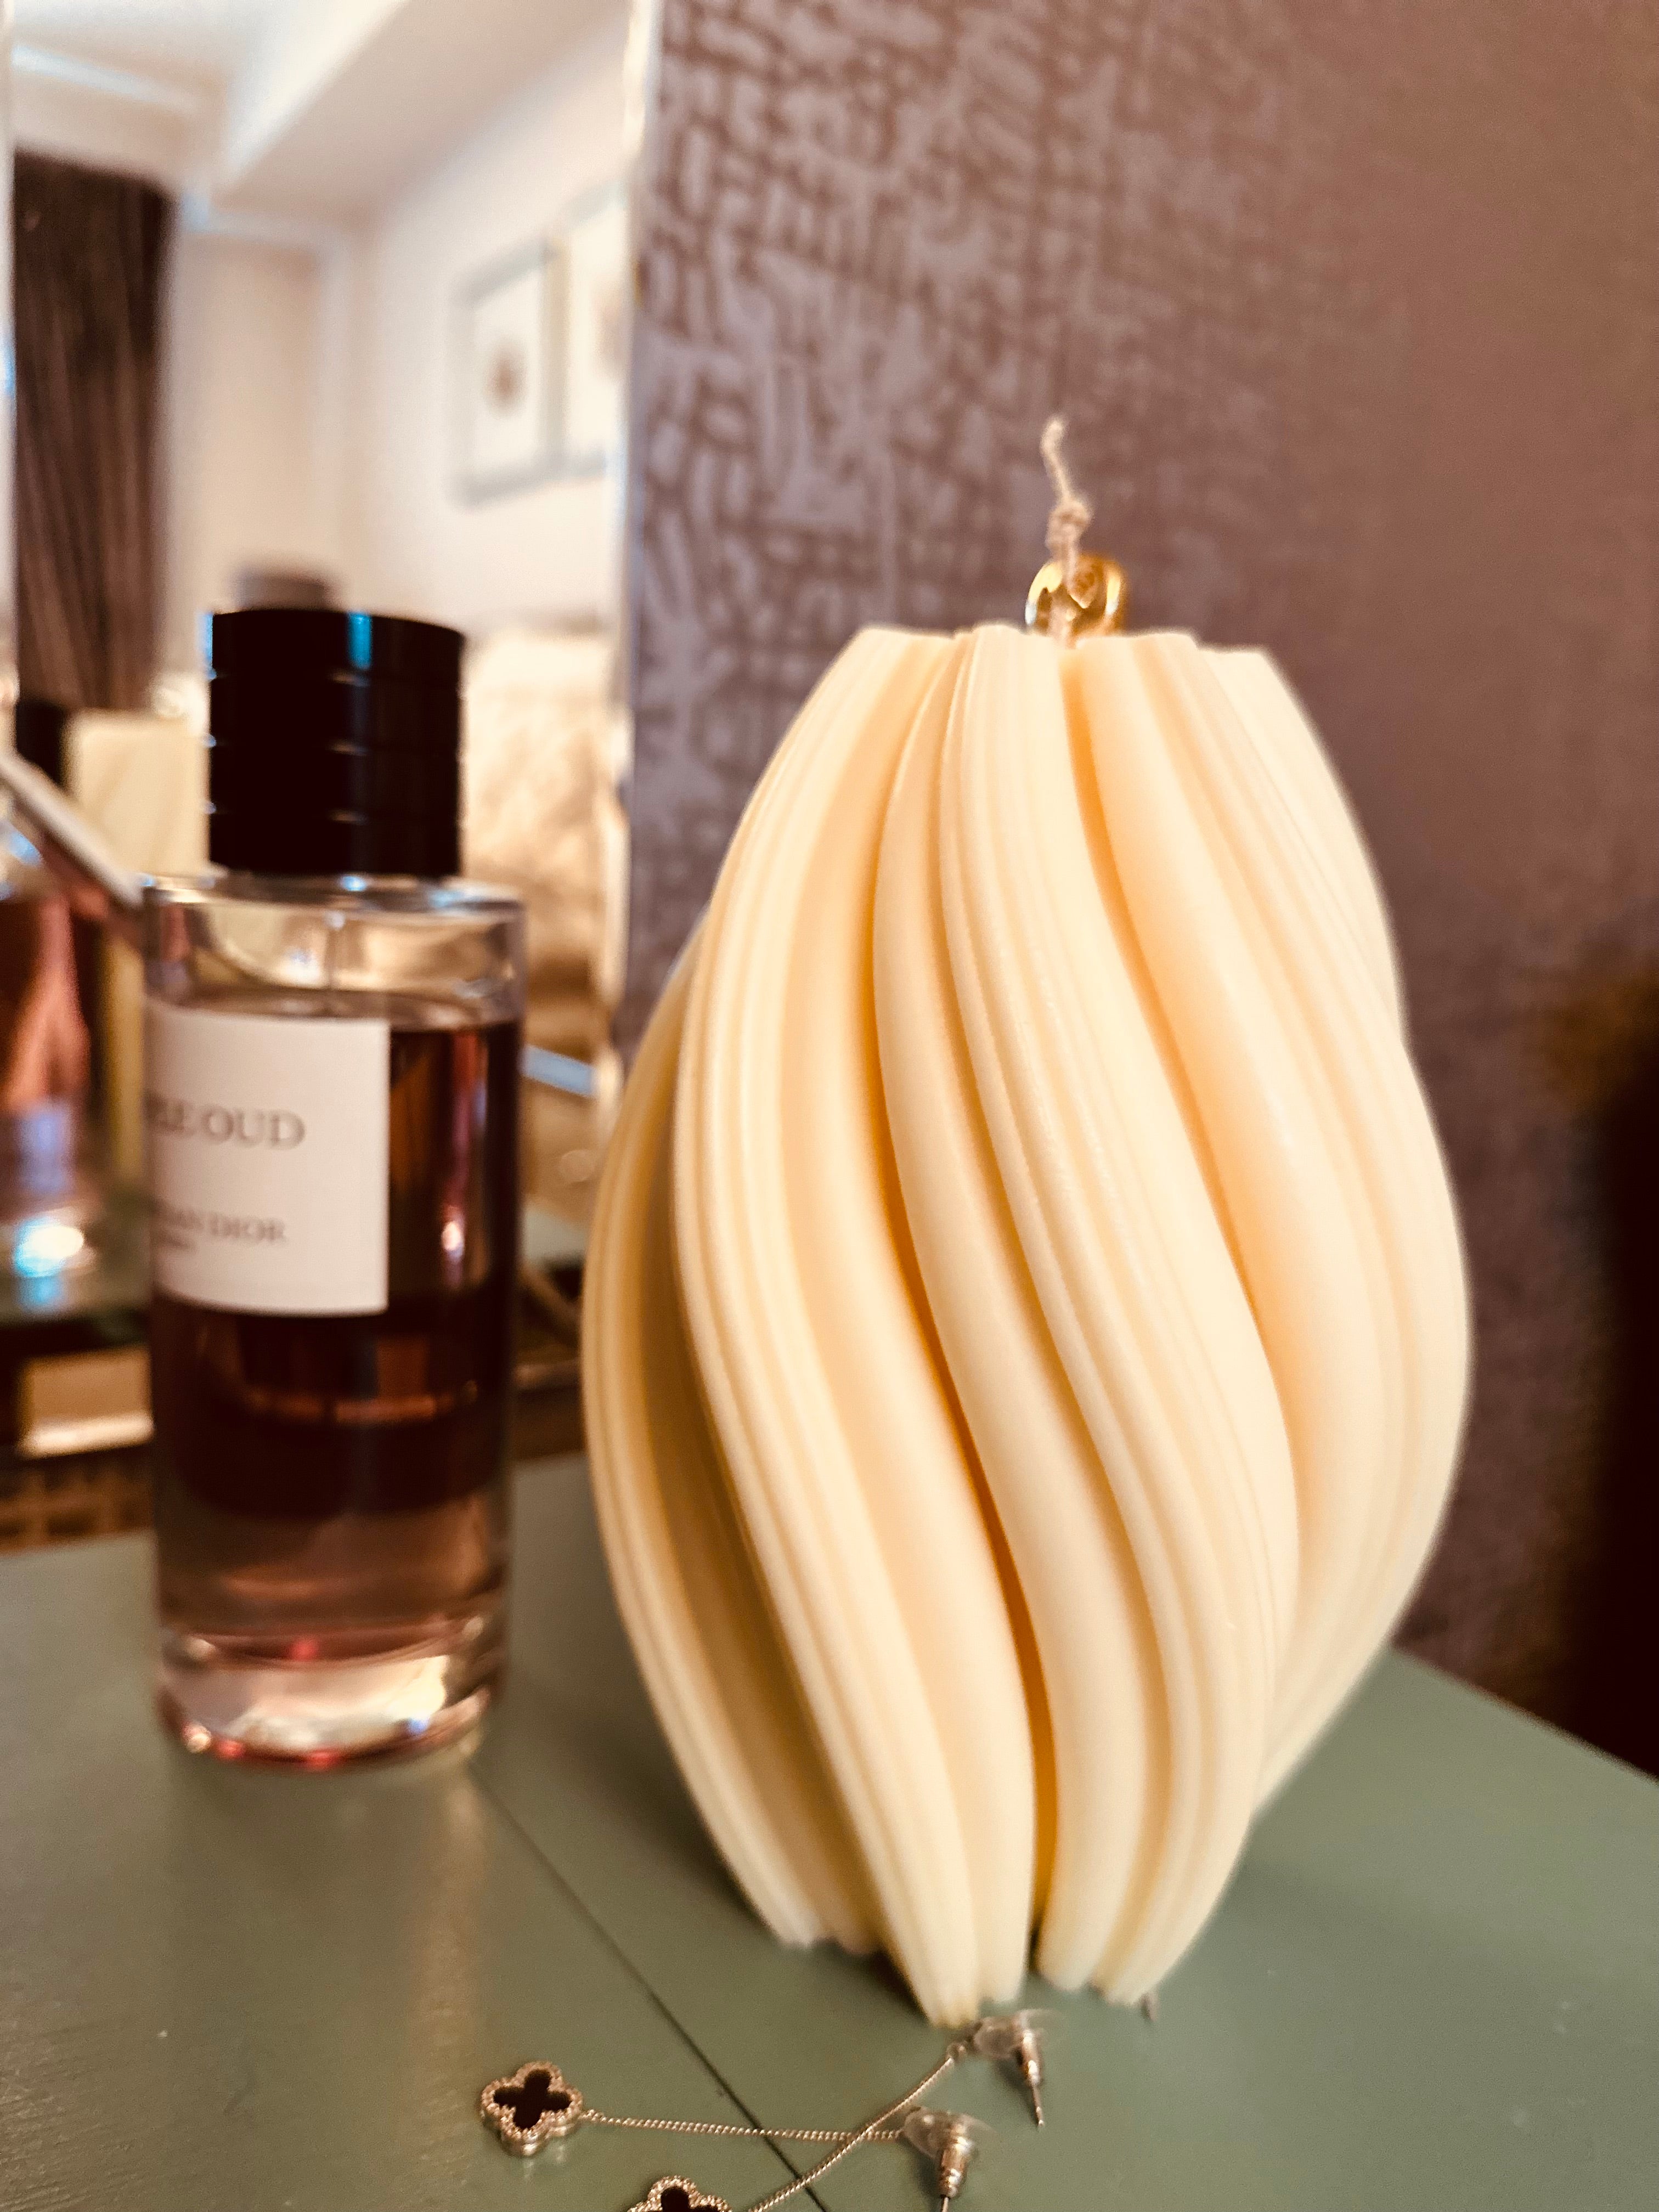 Introducing our captivating Extra Large Swirl Pillar Candle. The sweeping swirl design of this sculptural candle adds a touch of sophistication to your home